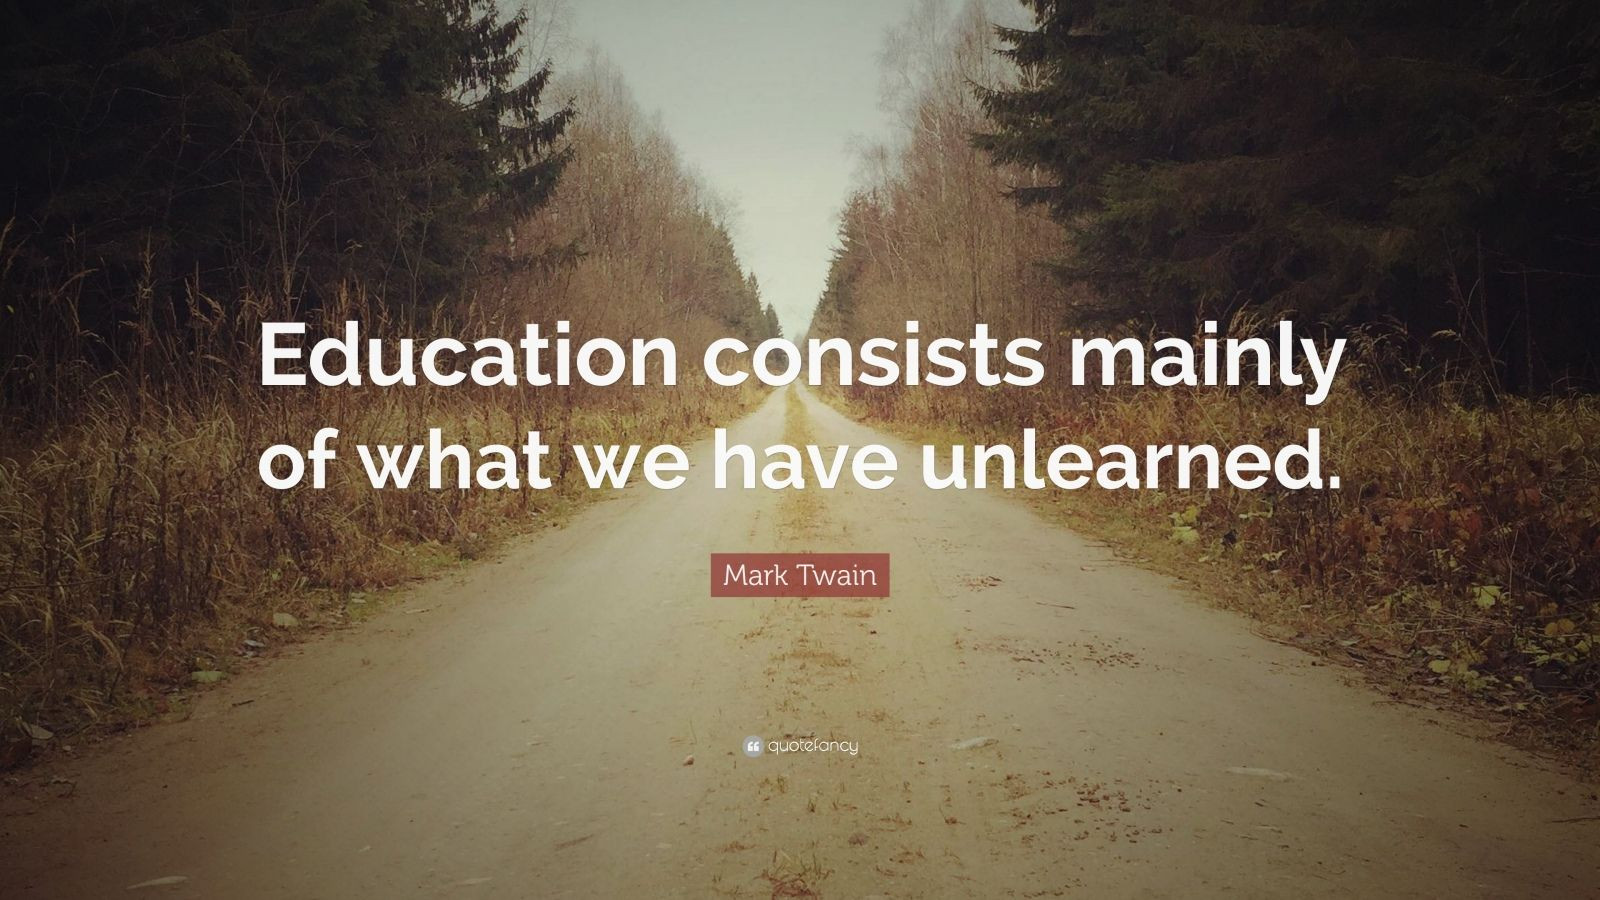 Mark Twain Quotes Education
 Mark Twain Quote “Education consists mainly of what we